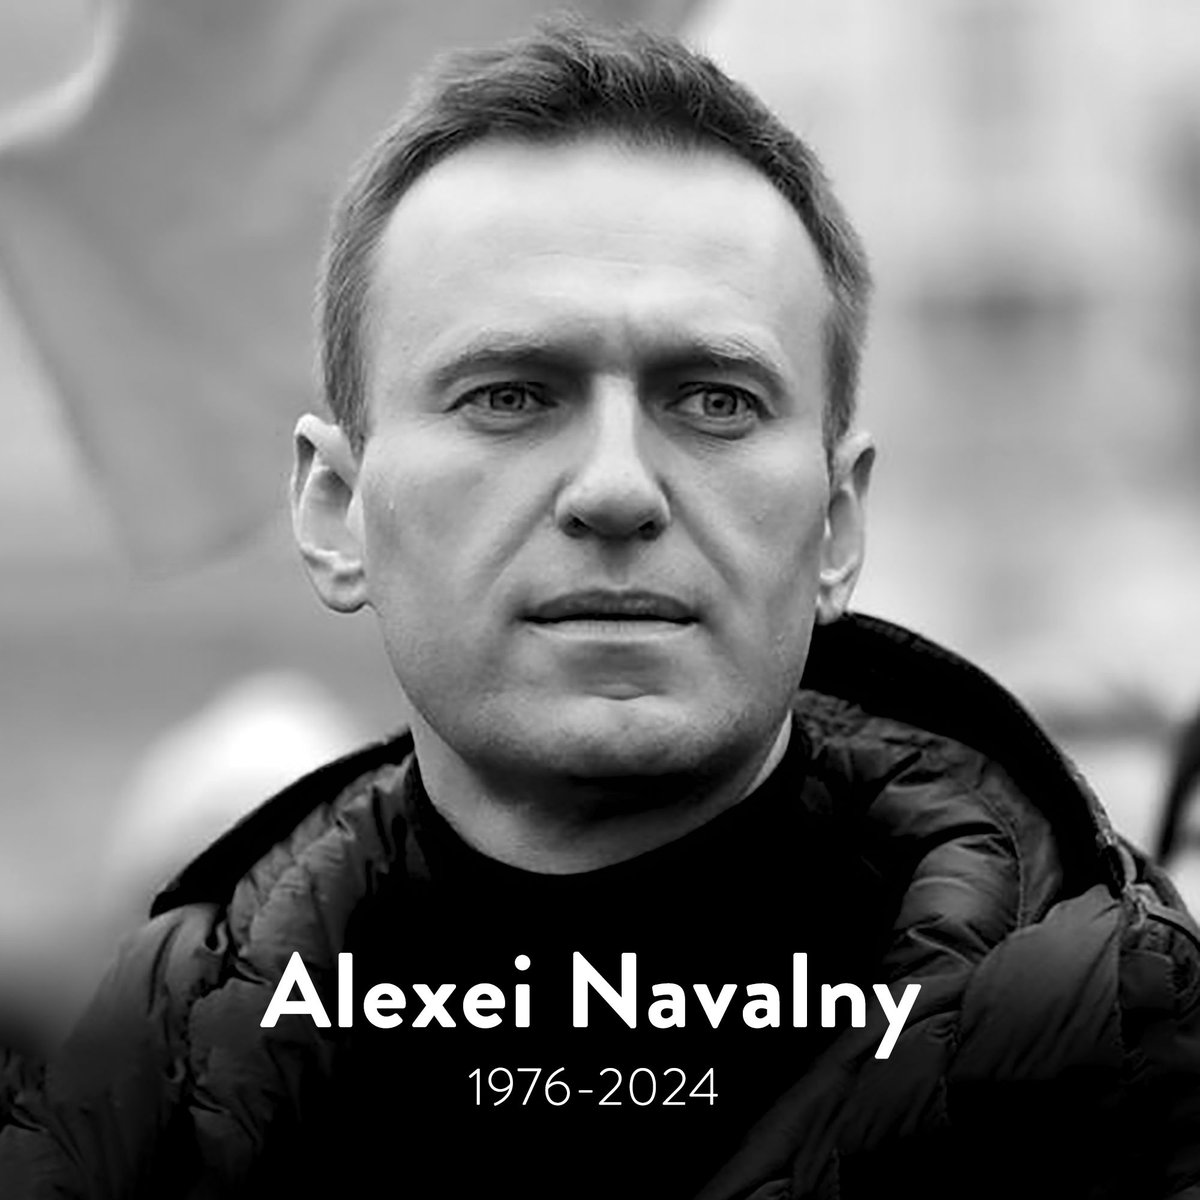 Alexei @navalny, 2021 #SakharovPrize winner, has died while imprisoned in one of Russia’s notorious penal colonies. He was there for unjustified and purely politically motivated reasons. The world has lost another freedom fighter; another hero. Rest in power!